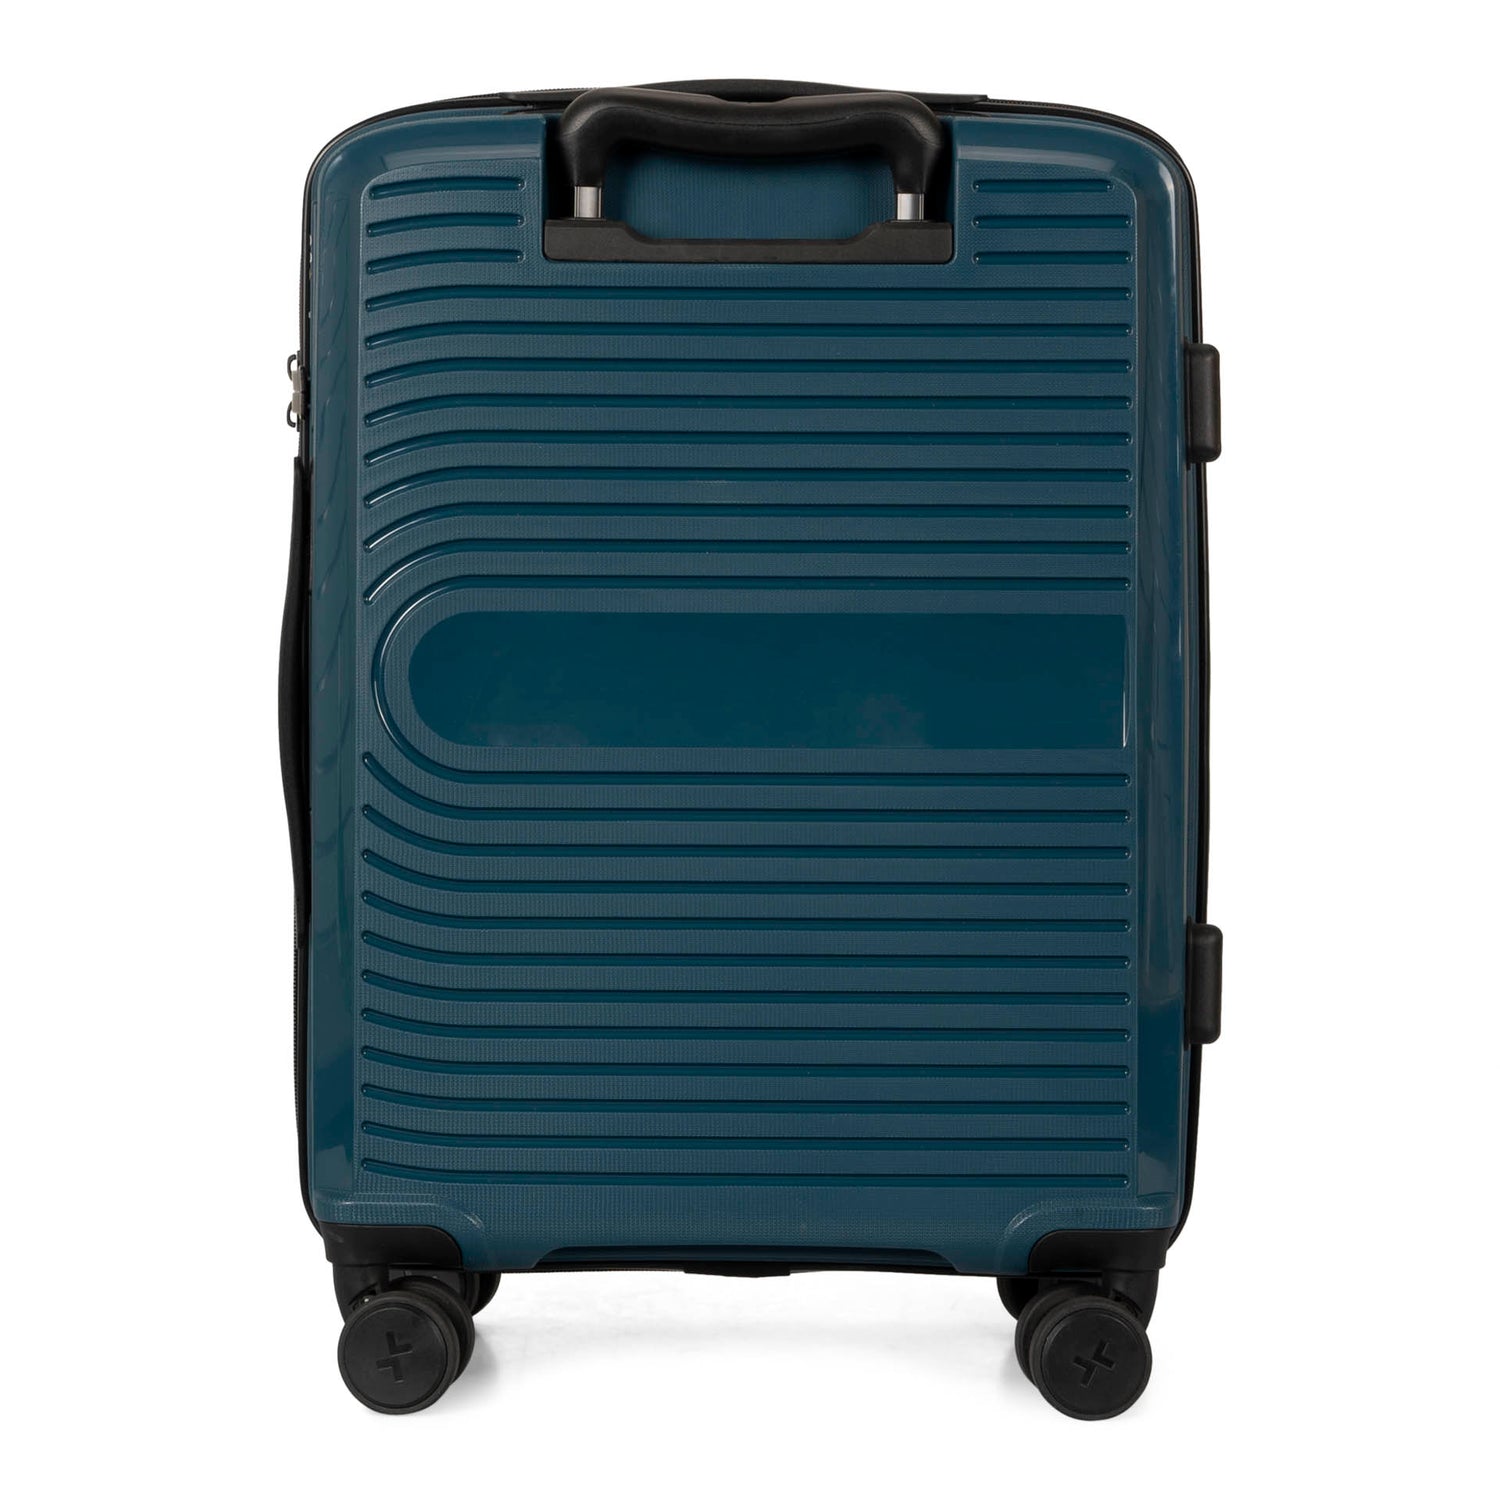 Back side of a navy luggage called Dynamo designed by Tracker showing its telescopic handle and lined-pattern shell.